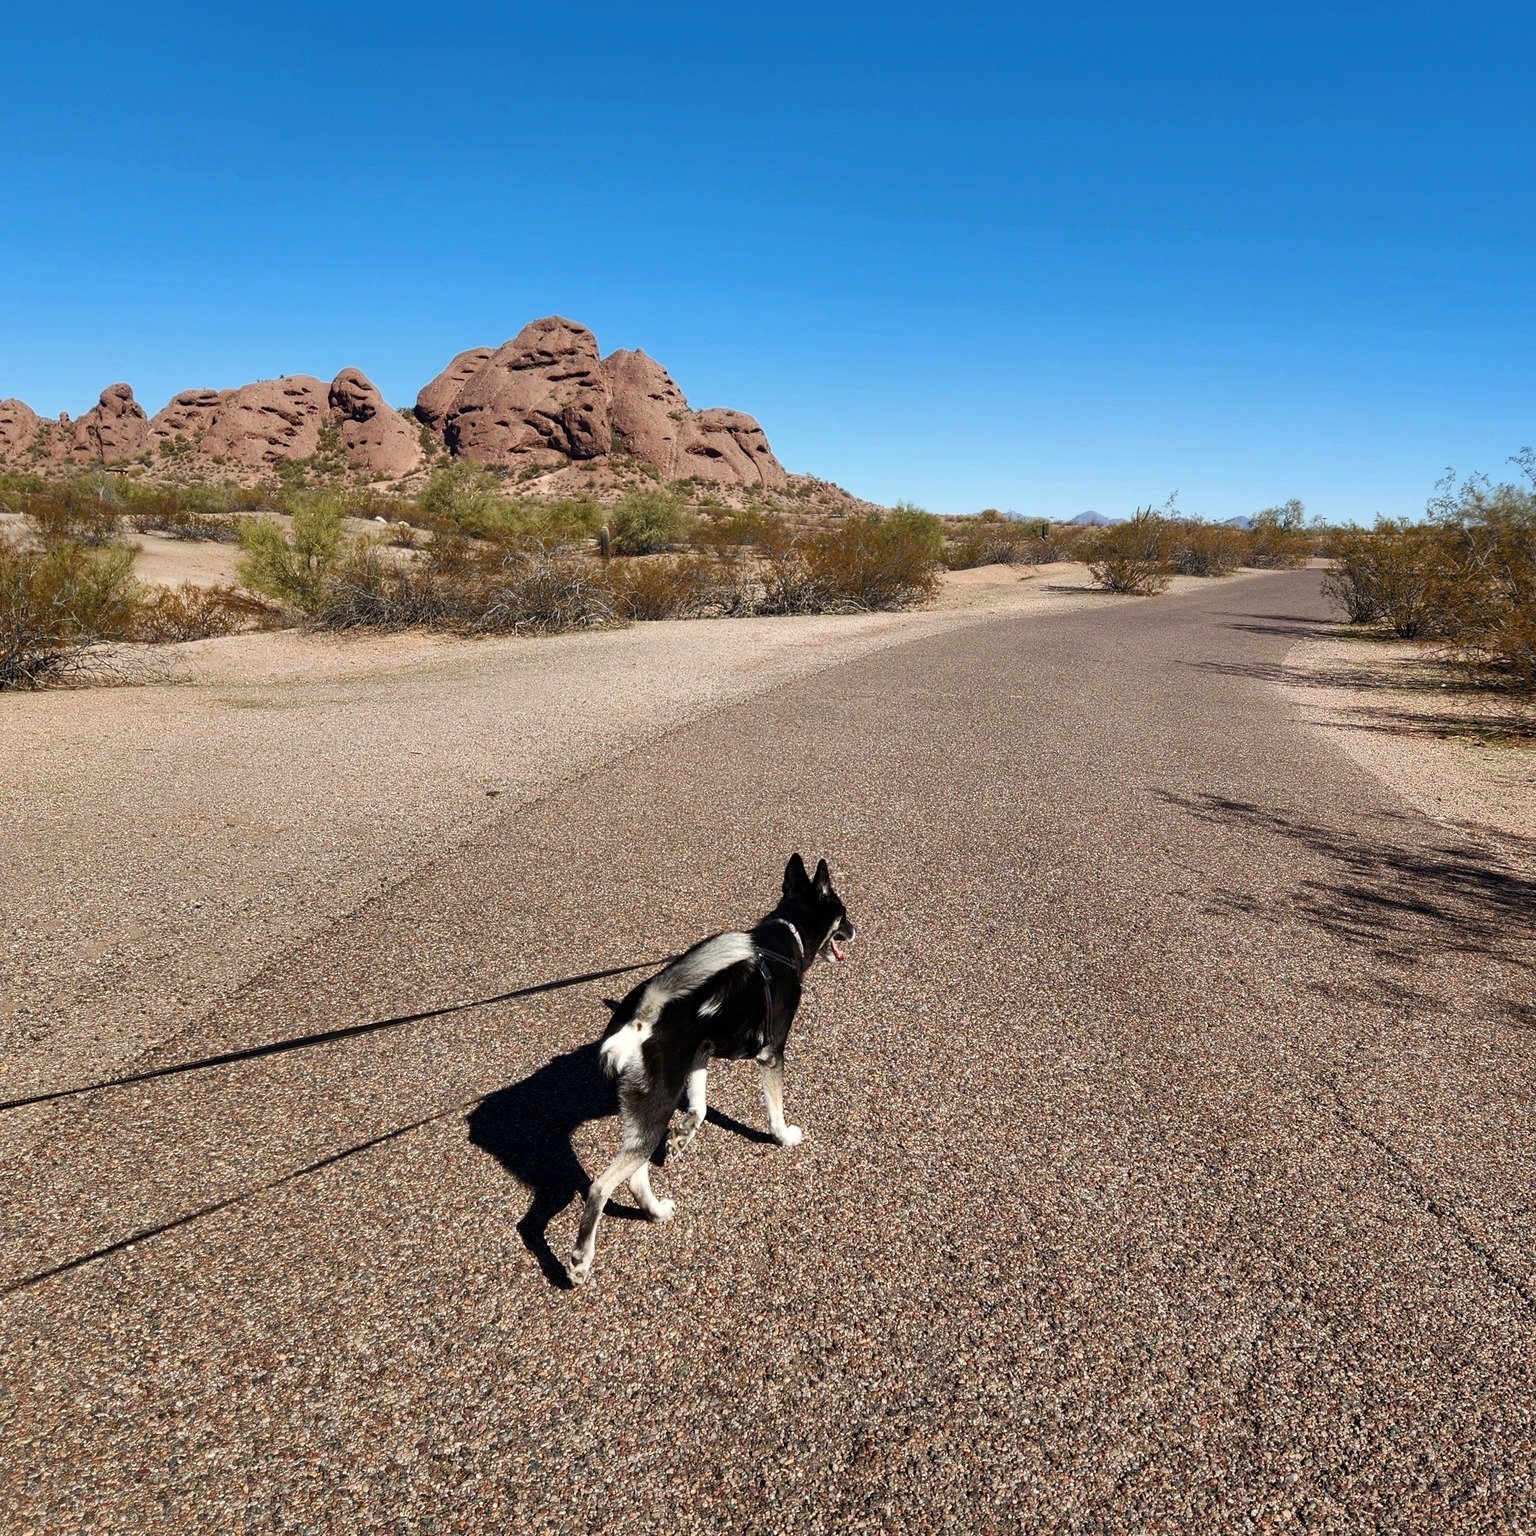 We have a park in the heart of Phoenix, Papago Park. Oh how this park can get busy! Lots to do, like walking, hiking, sightseeing, picnic lunches and plenty of scenery all around, especially the Phoenix skyline. We walked our old family dog, Daisy, o